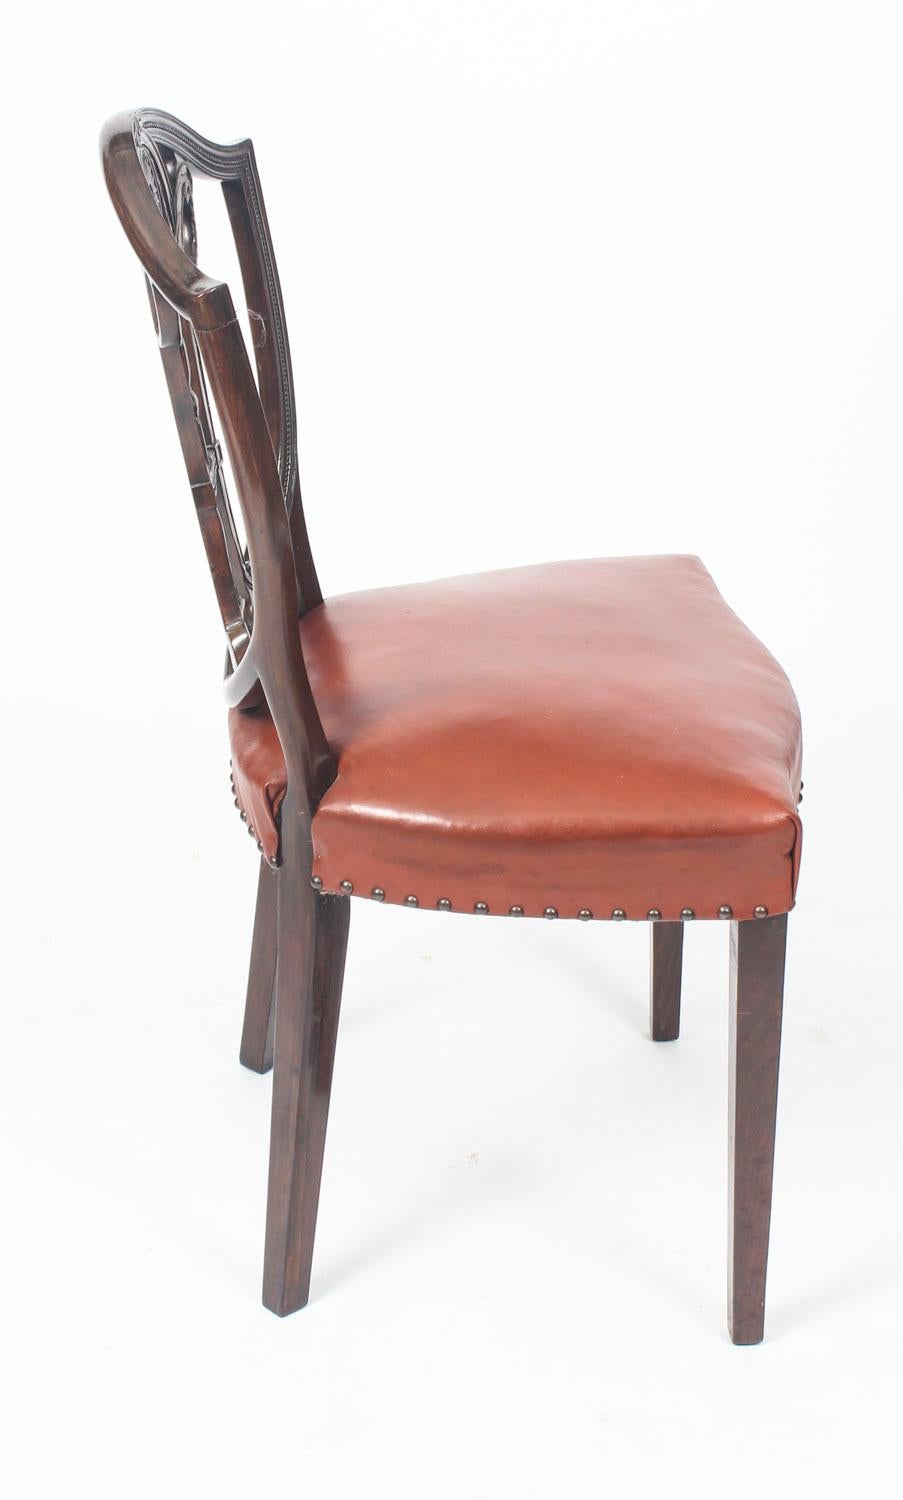 Leather Antique Set of Eight English Hepplewhite Shield Back Dining Chairs 19th Century